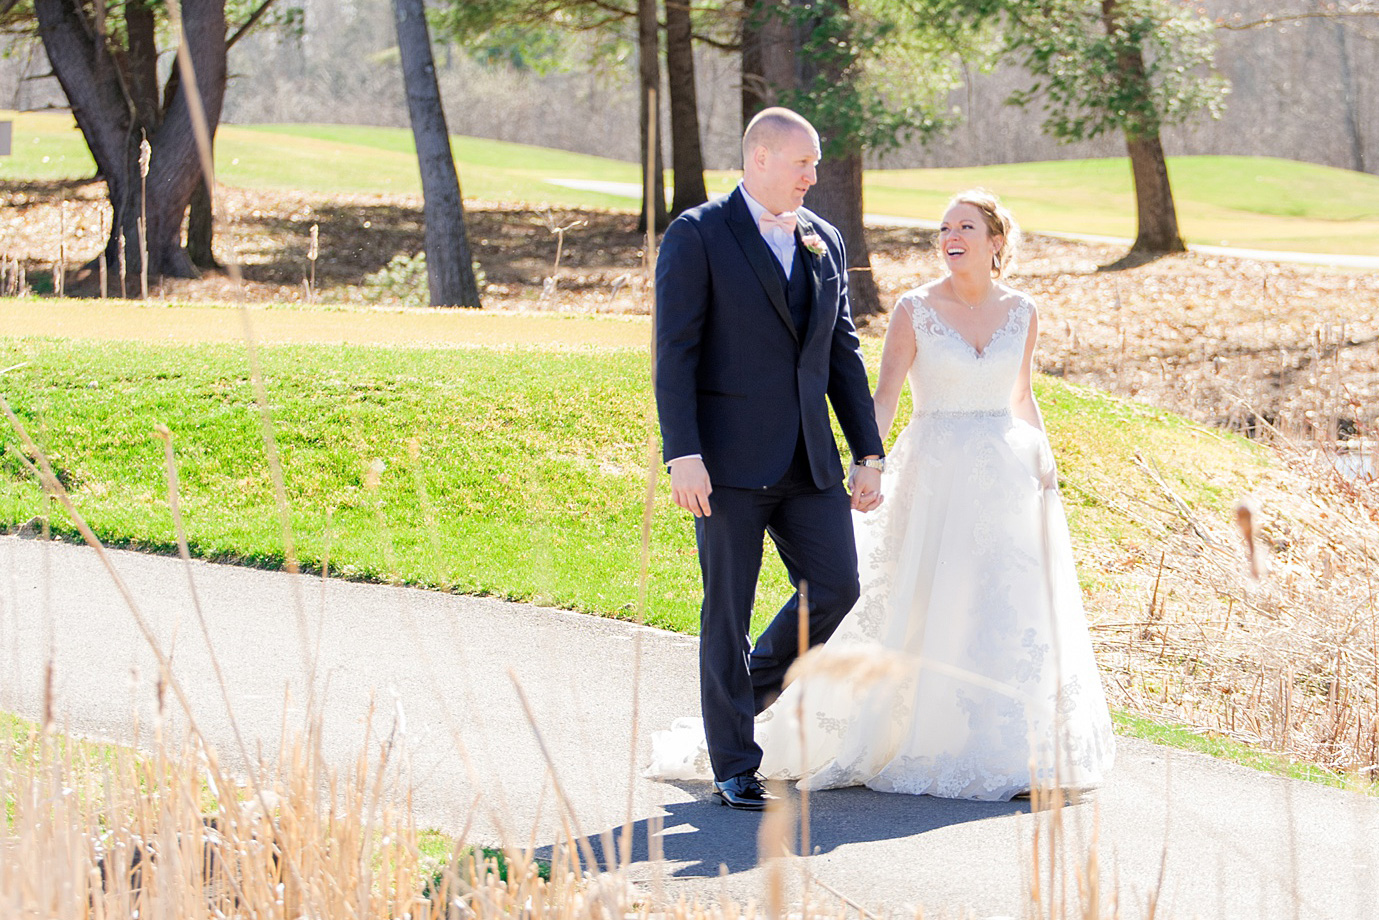 Photos from Saratoga Springs, New York by Mikkel Paige Photography. This picture shows the bride and groom walking on the golf course during their spring wedding. #SaratogaSprings #golfcoursewedding #SaratogaSpringsNY #SpringWedding